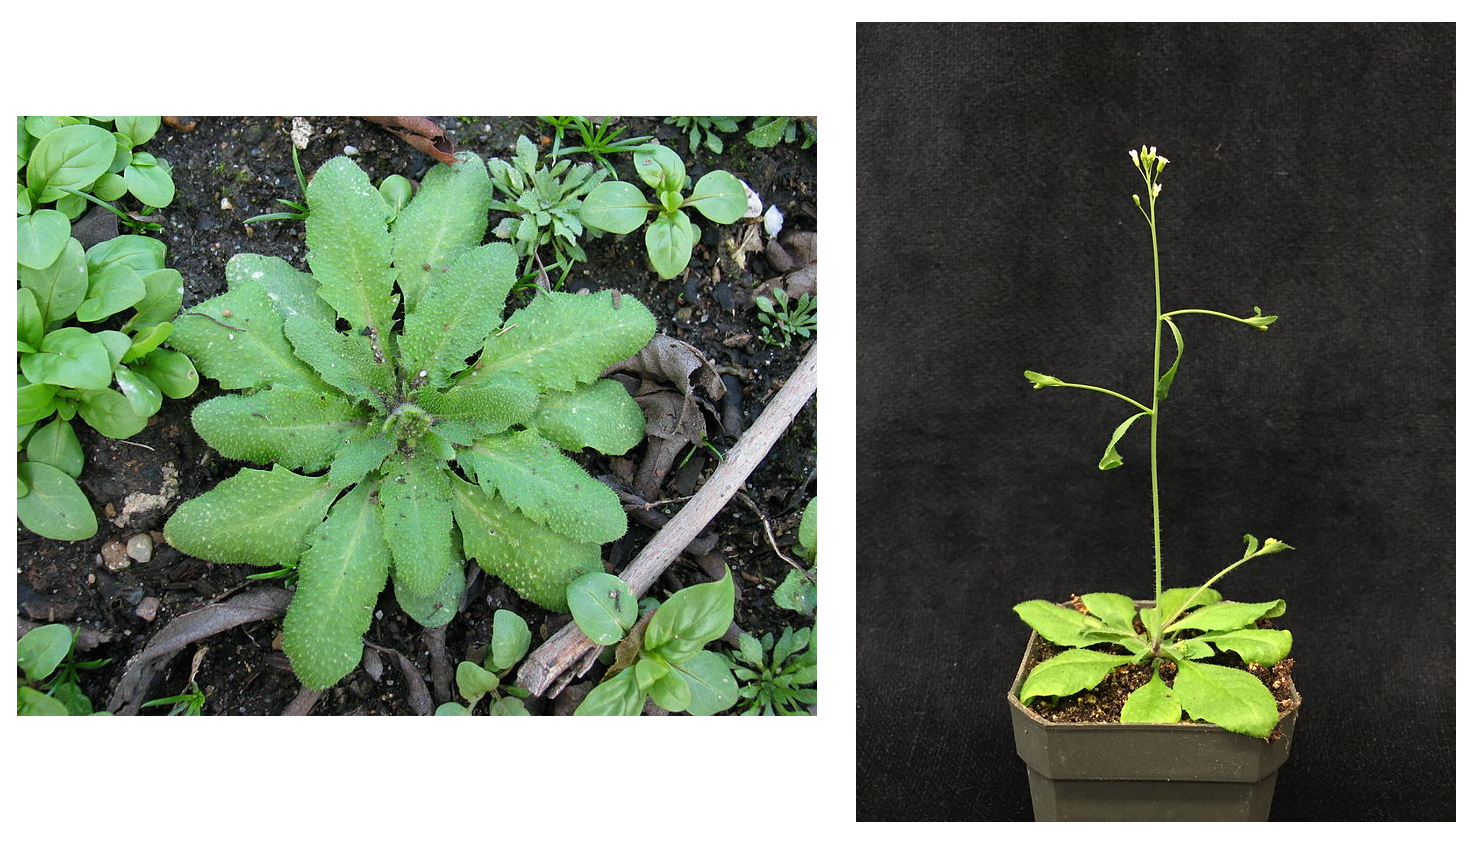 Arabidopsis thaliana as basal rosette (left) and bolted and flowering (right). The plant on the right has a long stem emerging from the basal rosette.